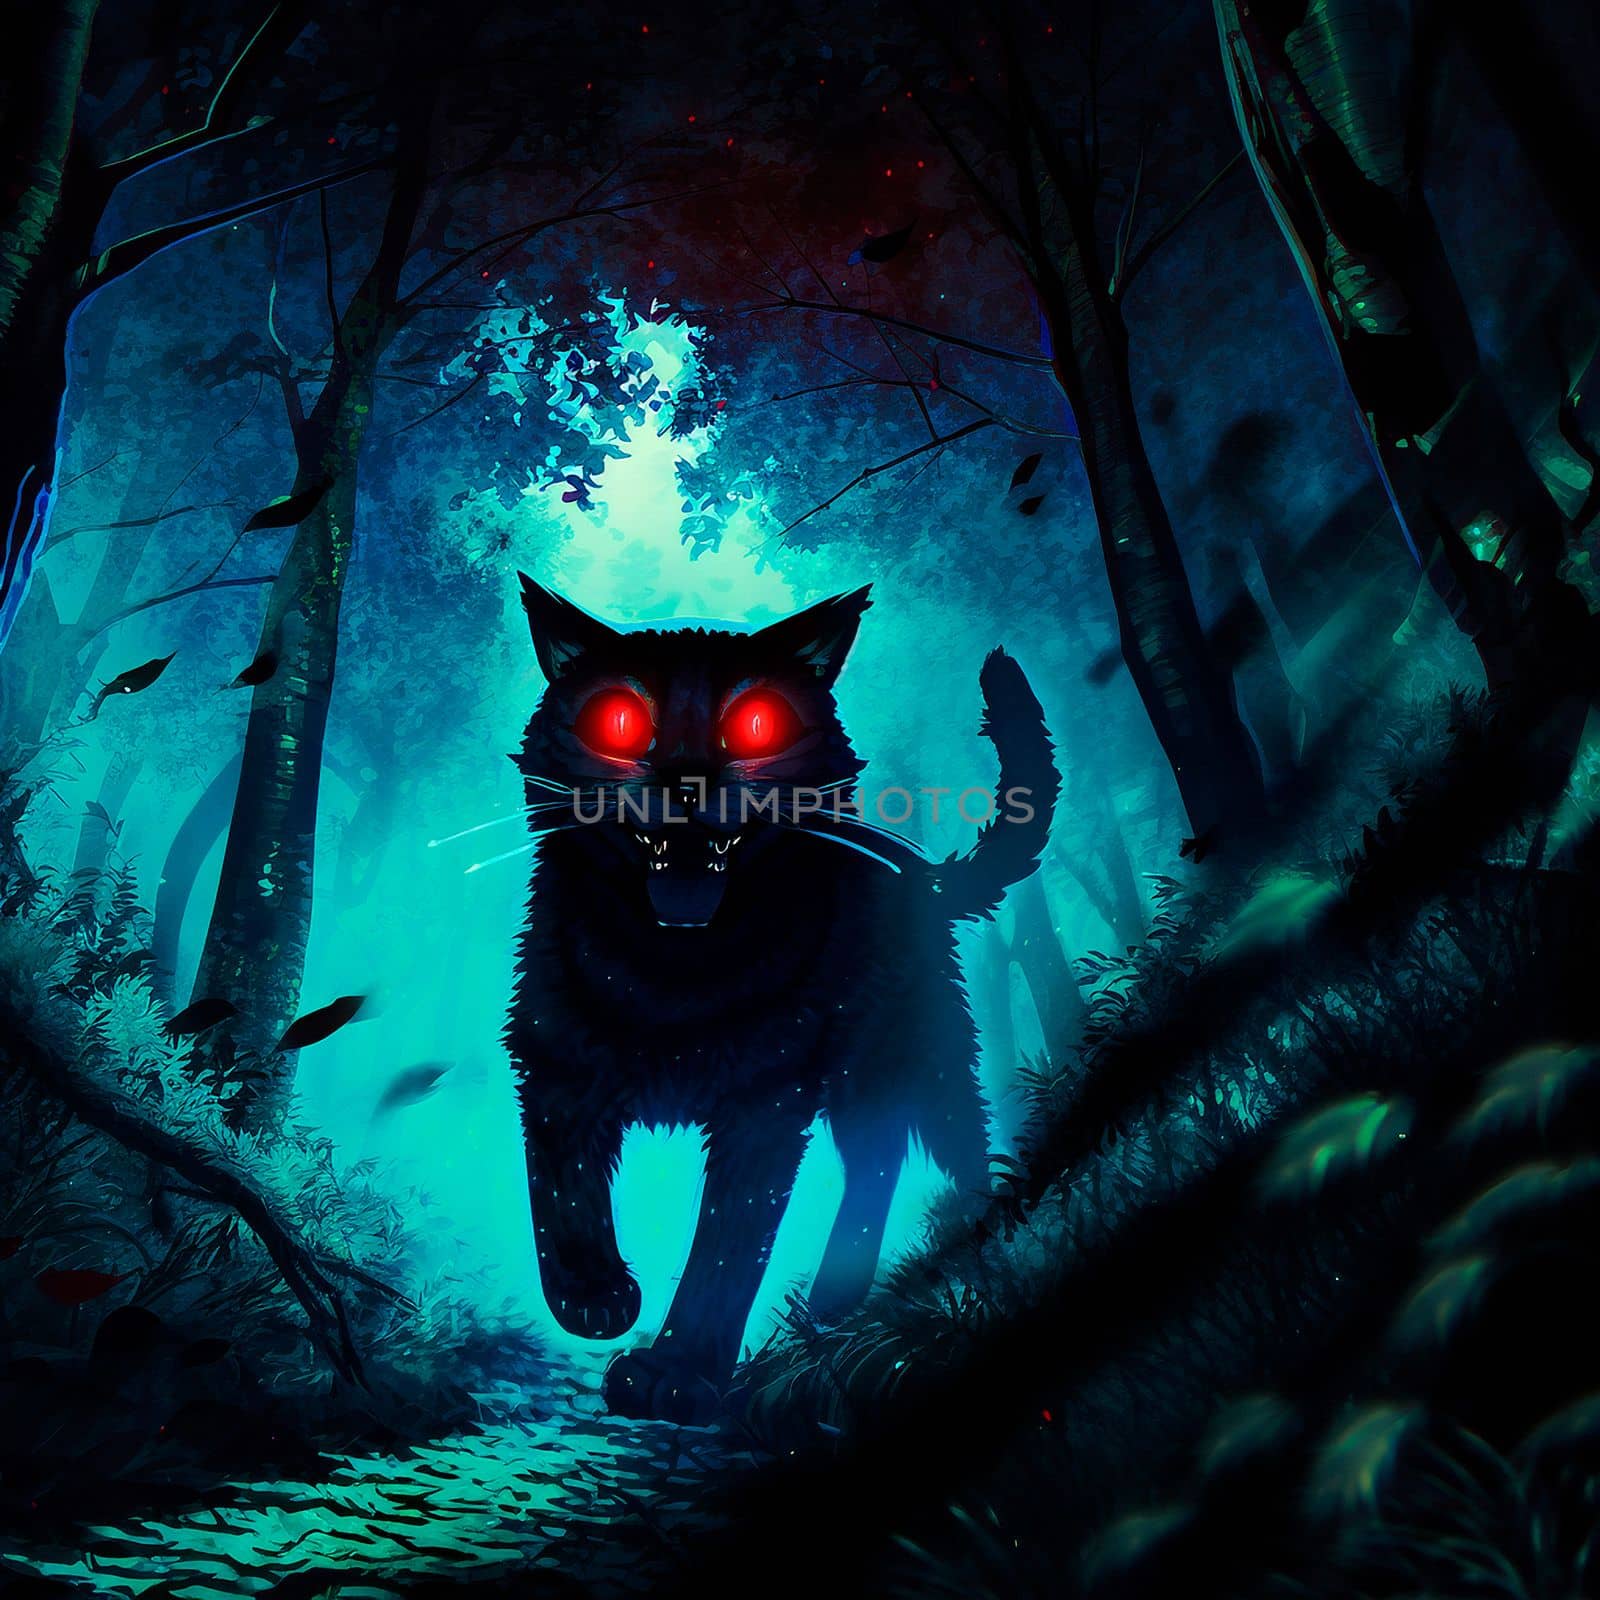 A cat with red eyes in a dark forest by NeuroSky